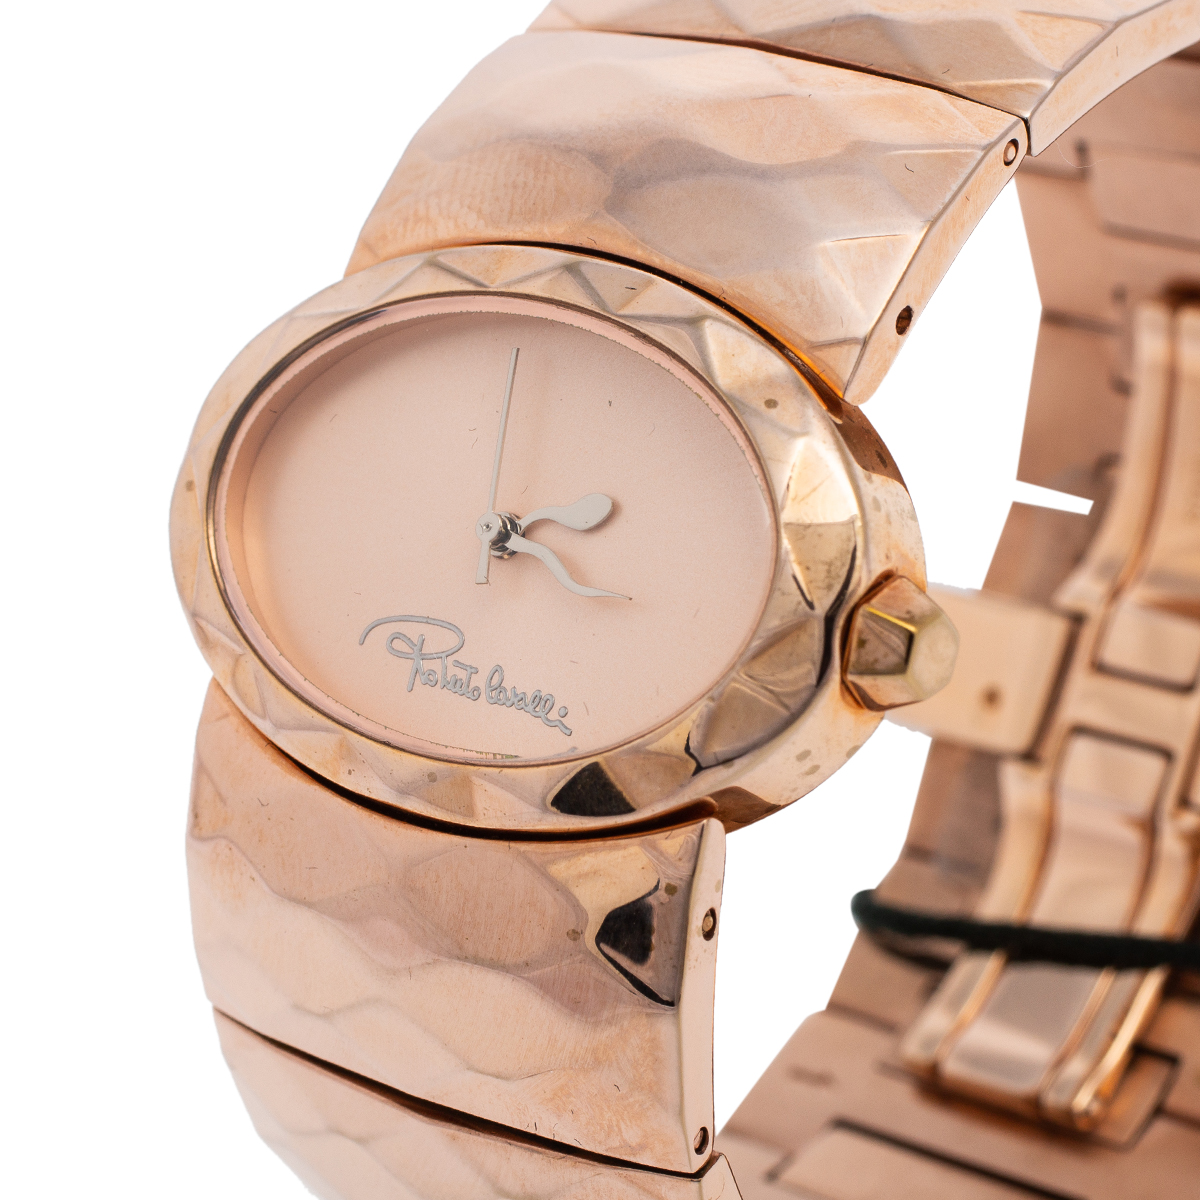 

Roberto Cavalli Champagne Pink Rose Gold Plated Stainless Steel R7253133517 Women's Wristwatch